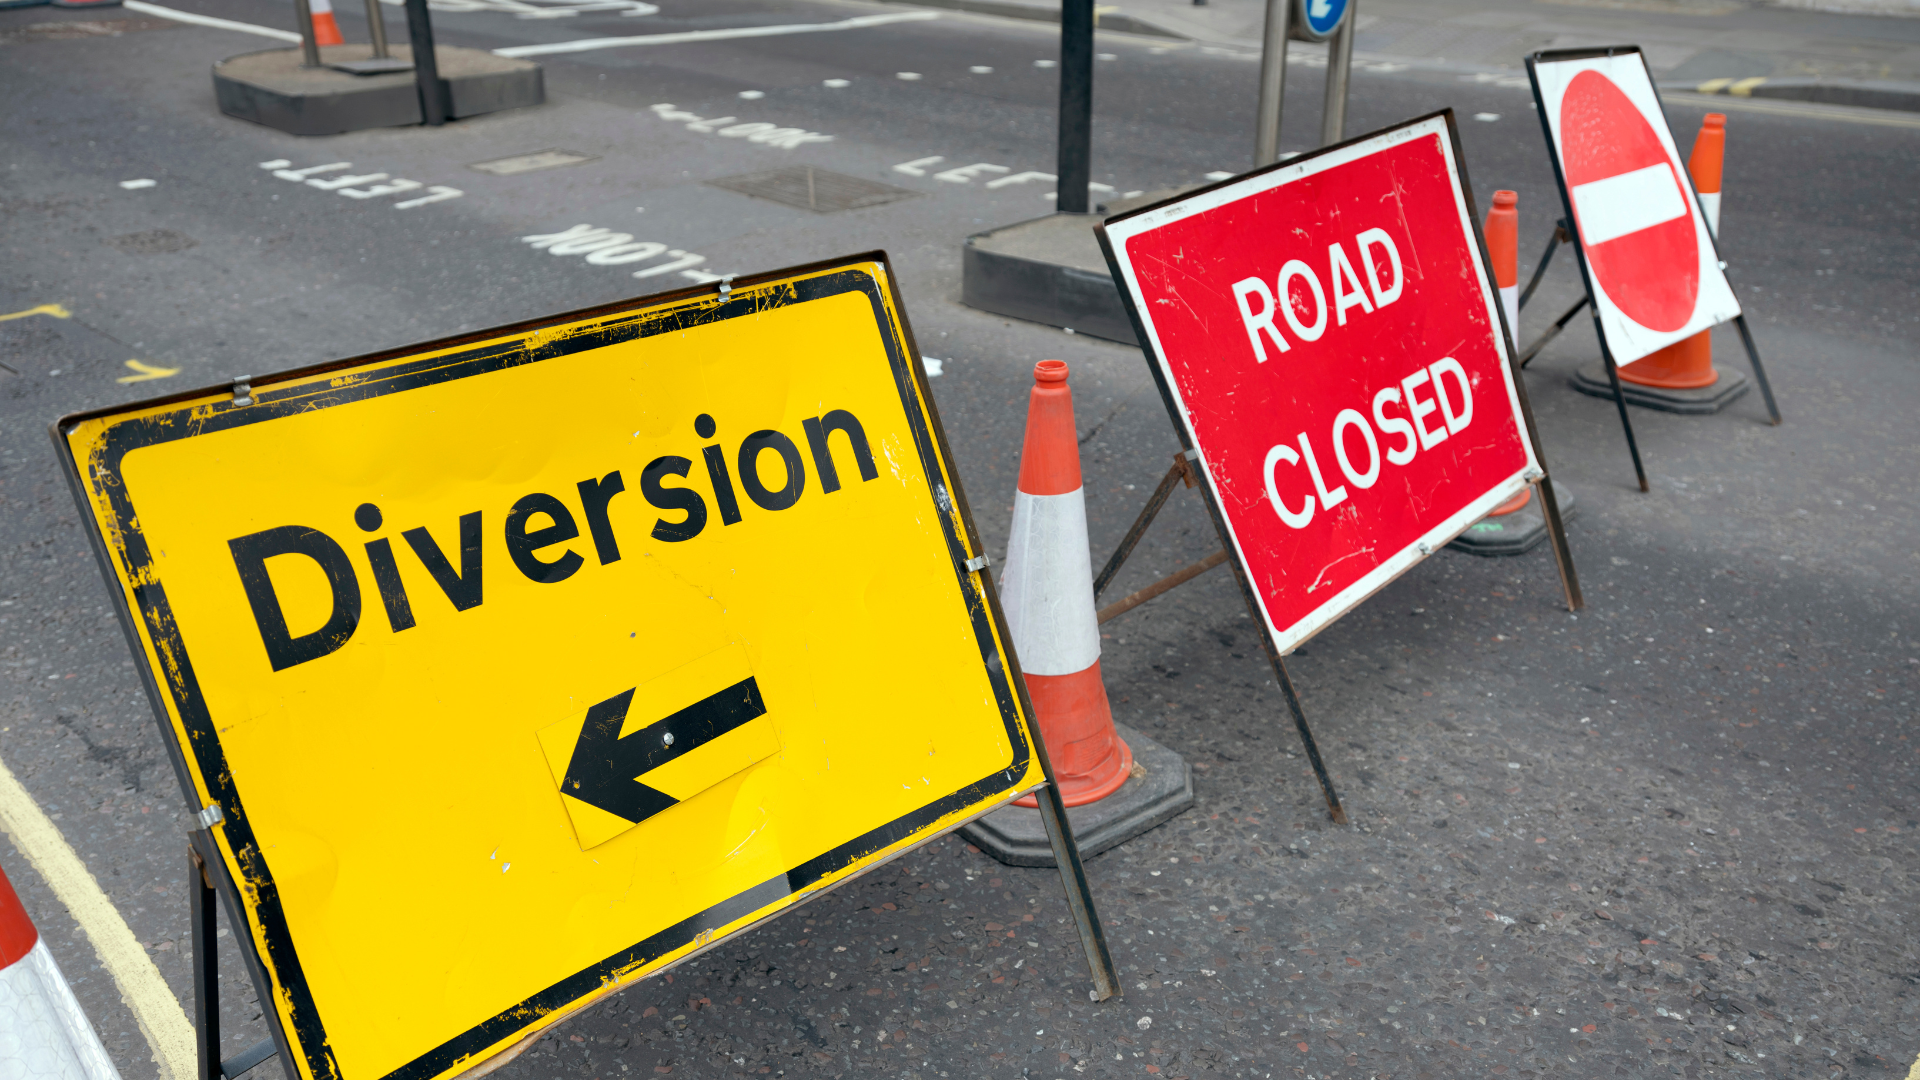 Diversion and road closed sign